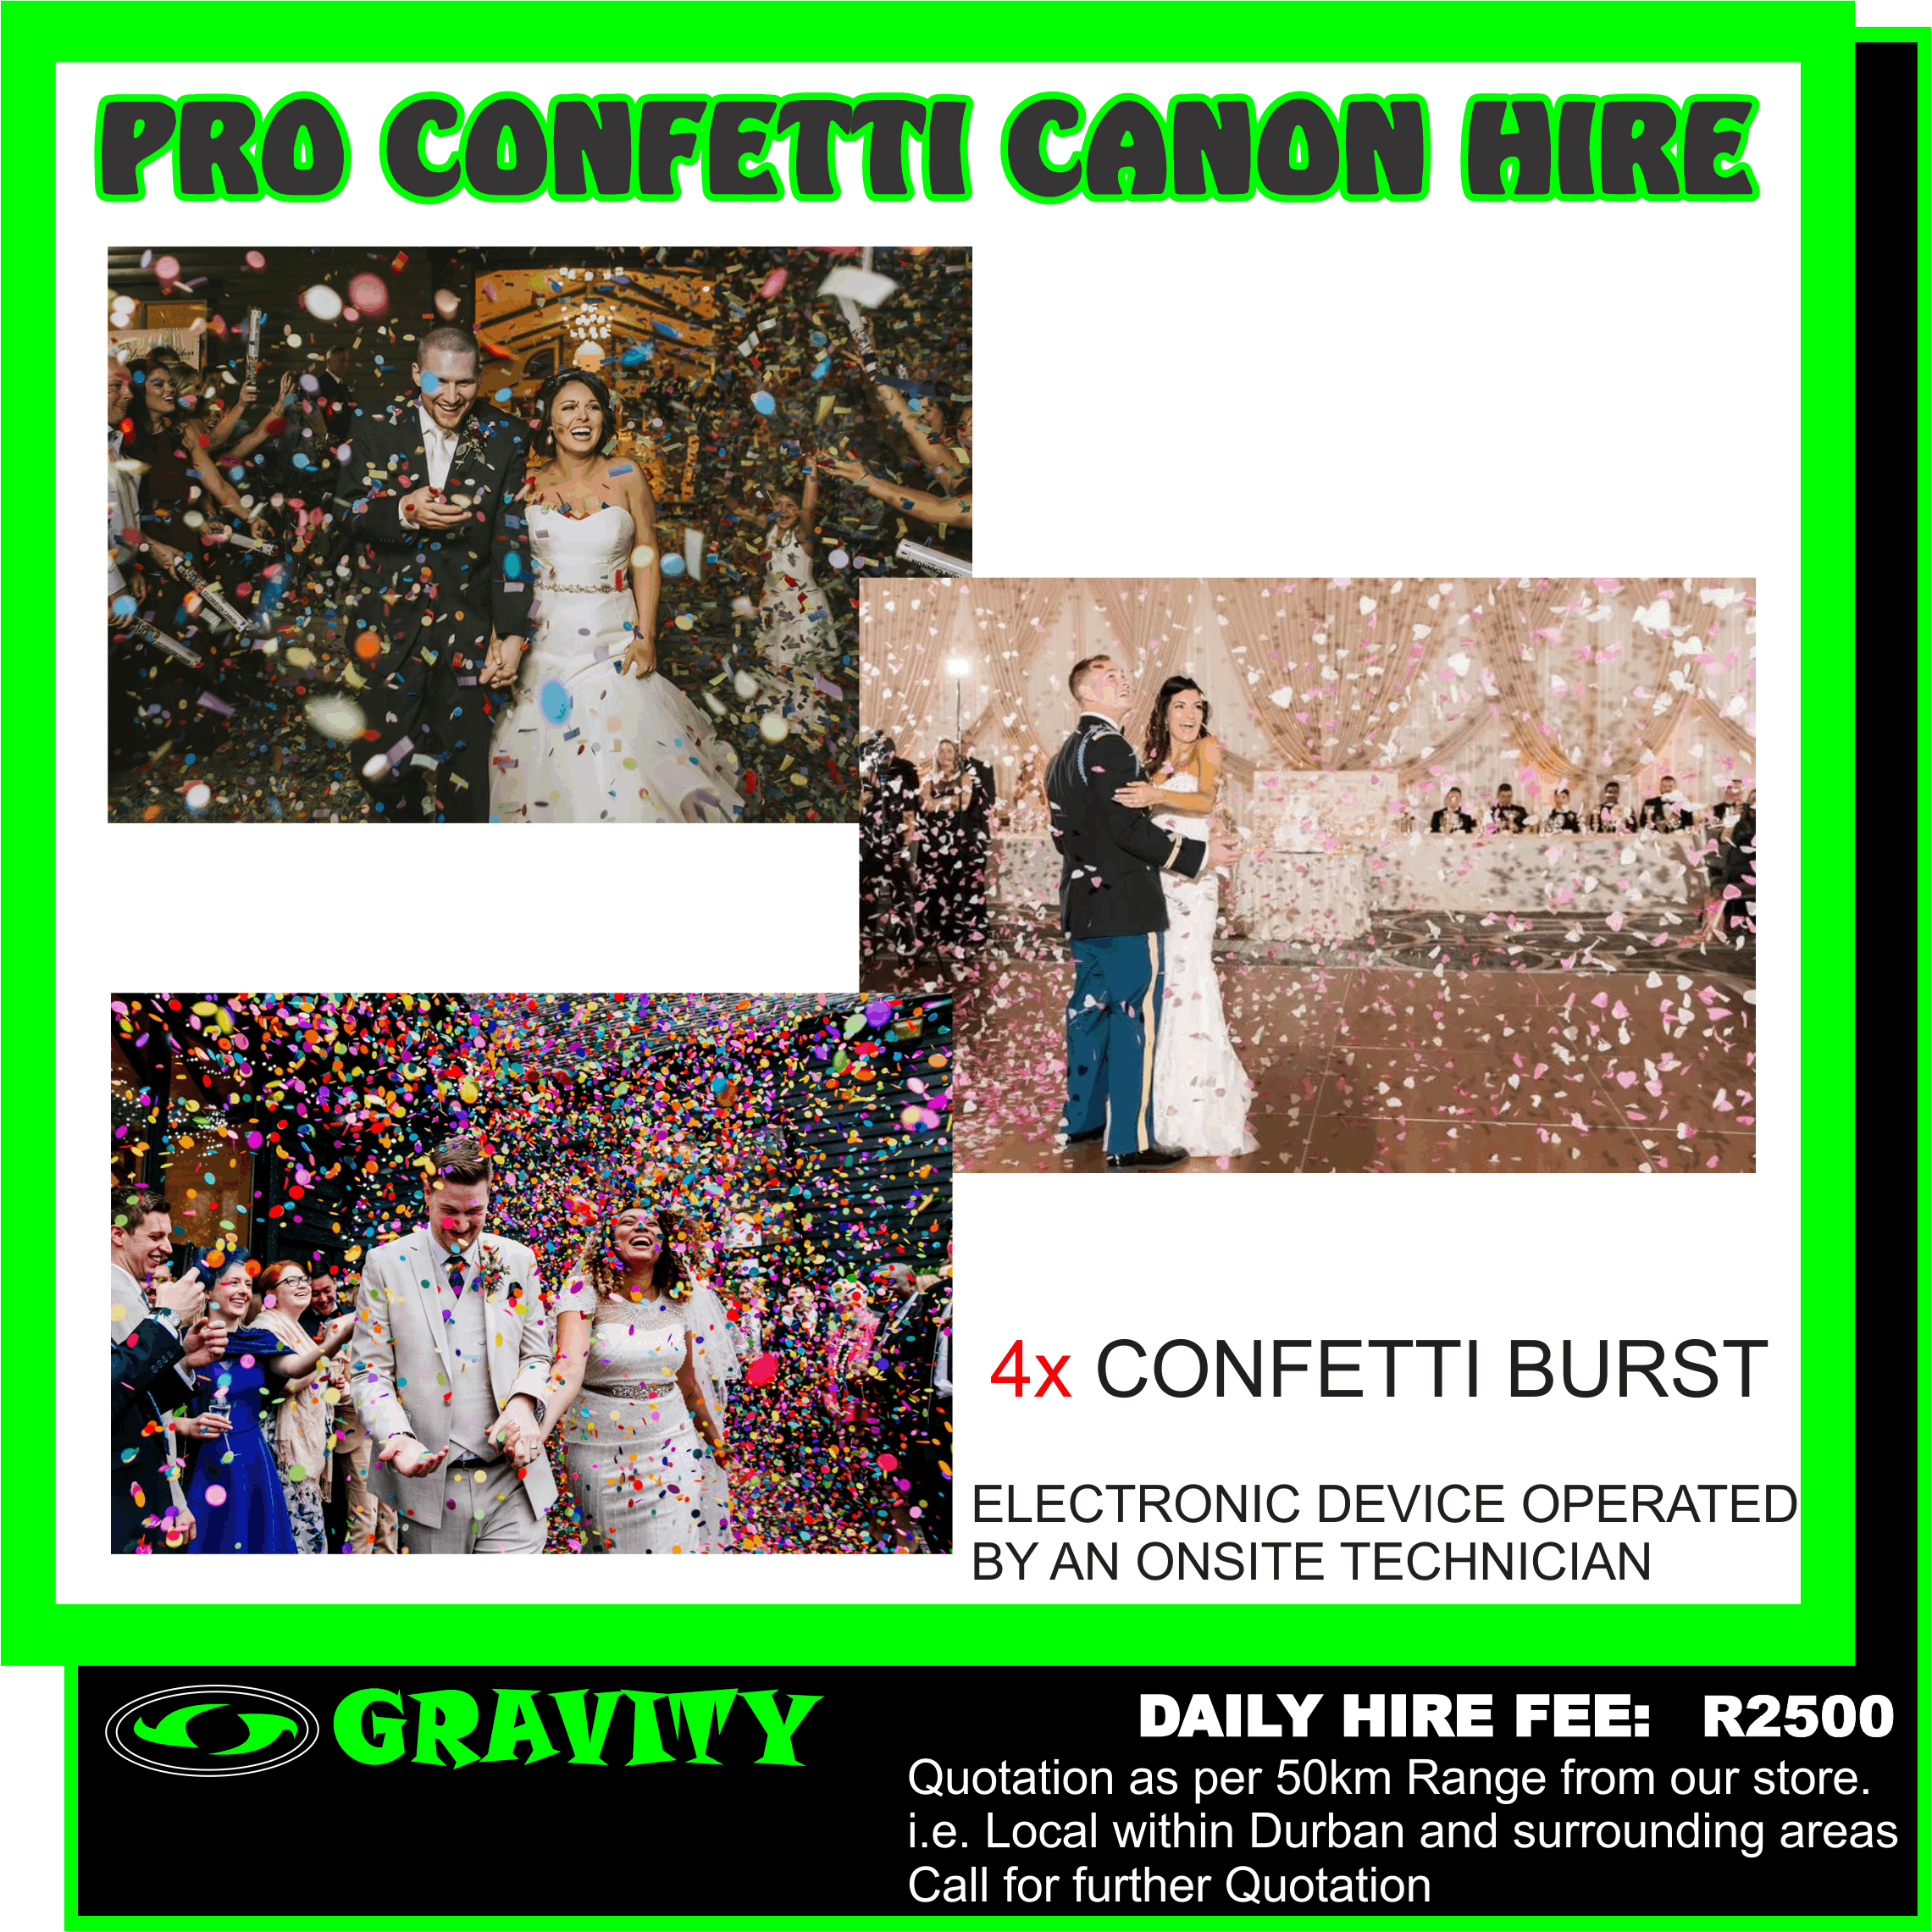 Confetti machine in KwaZulu-Natal | Gumtree Classifieds in ... https://www.gumtree.co.za › s-kwazulu+natal › confetti+machine View Gumtree Free Online Classified Ads for confetti machine and more in KwaZulu-Natal. ... Confetti Cannons, Colour washing, Screens and projectors for hire. Confetti cannon in Durban City | Gumtree Classifieds in ... https://www.gumtree.co.za › s-durban-city › confetti+cannon All Categories in Durban City. 5 Photo(s) Dj services, Sound, Lighting. 9 Photo(s) Confetti Cannons Color washing Screens, Flame machines, Smoke & Fog machine and projectors,Dj. 8 Photo(s) Flame Machines , Confetti Cannons , Color washing follow spots and screens & projectors for hire. 3 Photo(s) Dj with Sound and ... Confetti Canons for Hire-Weddings,Birthday parties | Junk Mail https://www.junkmail.co.za › events › kwazulu-natal › durban › chatsworth Jun 22, 2019 - Confetti Blast create excitement, fun and is the perfect addition to any ... Region: KwaZulu-Natal - Durban; Published: 22/06/2019; Ad Type: ... Fun Party Equipment | Funtacee Parties funtaceeparties.co.za › fun-party-equipment View our range of fun party equipment for hire. ... and have selected party equipment available for hire in Cape Town and Durban. .... Confetti Blaster Hire. Confetti Blaster Hire | Online Party Supplies - Funtacee Parties funtaceeparties.co.za › confetti-blaster-hire Hire a Confetti Blaster for your party, wedding or fun event in Johannesburg, Durban and Cape Town, Order online! DISCO LIGHTING FOR HIRE - GRAVITY DJ STORE GRAVITY ... https://www.gravityaudio.co.za › Custom › Home DISCO LIGHTING FOR HIRE. DJ EFFECTS LIGHTING FOR HIRE DURBAN. OUTDOOR /INDOOR LANTERN LIGHTING EFFECT HIRE DURBAN. PROFESSIONAL CONFETTI / STREAMERS / ROSE PETALS CANON HIRE DURBAN. REQUIRMENTS WHEN HIRING OUR EQUIPMENT-PLEASE READ. DISCO PARTY LIGHTING FOR HIRE DURBAN. DISCO PARTY SMOKE MACHINE FOR HIRE IN DURBAN. Aisle Hire It - Home | Facebook https://www.facebook.com › ... › Arts & Entertainment  Rating: 5 - ‎16 votes Aisle Hire It, Durban, South Africa. 6K likes. Aisle Hire It specialises in unique open air photo booths, illuminated marquee letters and neon signs. Confetti Machines Hire - Party Hire Hub www.partyhirehub.co.za › Party Hire Options Confetti Machine Hire Johannesburg. Confetti Blaster Hire / Confetti Machines Hire - Hire Powerful, Top Quality Confetti Machines. Fun and Professional Confetti ... Smoke/Fog/Confetti Machines : PQSound.co.za, Audio Visual ... www.pqsound.co.za › ... Products 1 - 10 of 21 - PQSound.co.za : Smoke/Fog/Confetti Machines - Mixers DJ Speakers Smoke/Fog/Confetti Machines Turntables Musical Instrument Cables ... Other Fun - Snow www.snowmachines.co.za › other Electric Blower sprays confetti +-6m. Includes: Confetti. Delivery & collection (Joburg). *Optional: Metallic Confetti (extra R150) & UV ... Rental includes fluid. Searches related to CONFETTI HIRE DURBAN games for hire in johannesburg arcade games for hire durban carnival games hire johannesburg fun day equipment hire carnival equipment hire party equipment hire durban games to hire for parties Pam Moodley - Self Employed - Rose Petals Party Hire ... https://za.linkedin.com › ... Durban Area, South Africa - ‎Rose Petals Party Hire Pam Moodley. Self Employed at Rose Petals Party Hire. Durban Area, South Africa. Events Services. Rose Petals Party Hire. Montarena Secondary School ... Rose Petals Party Hire - Facebook https://m.facebook.com › Rose-Petals-Party-Hire-250335041674106 Rose Petals Party Hire is on Facebook. To connect with Rose Petals Party Hire, join Facebook today. Join. or ... Durban wholesalers · Business Supply Service ... Confetti machine in KwaZulu-Natal | Gumtree Classifieds in ... https://www.gumtree.co.za › s-kwazulu+natal › confetti+machine Confetti Cannons, Colour washing, Screens and projectors for hire. SAMRO accredited Djs available for all functions. Comes with all equipment and lighting We ... Confetti machines in KwaZulu-Natal | Gumtree Classifieds in ... https://www.gumtree.co.za › s-kwazulu+natal › confetti+machines Our DJ are the most reputable, experienced and reliable in Durban and we ... We hire Confetti Cannons, Flame Machines, Screens and projectors, Follow Spot ... Confetti | Wedding Party www.weddingparty.co.za › confetti 29 - Wedding bell bubbles - R15 · 28 - Rose petals one colour - R550 per box · 27 - Fresh Rose petals mixed - R350 per box · 26 - Dried rose confetti in organza ... Linen | Wedding Party https://www.weddingparty.co.za › linen Leaf petal tablecloths – 3.2m round · Linen Rentals 18 Various colors and shades table runners R35 Each · Linen Rentals 17 Rose gold sequence runners R75 ... DISCO LIGHTING FOR HIRE - GRAVITY DJ STORE GRAVITY ... https://www.gravityaudio.co.za › Custom › Home OUTDOOR /INDOOR LANTERN LIGHTING EFFECT HIRE DURBAN. PROFESSIONAL CONFETTI / STREAMERS / ROSE PETALS CANON HIRE DURBAN. You've visited this page many times. Last visit: 2019/10/17 Packages - SA Wedding Decor https://saweddingdecor.co.za › packages-2 Apr 15, 2016 - Confetti stands with fresh rose petal confetti for 100 people ... (in excess of 50 people) at ceremony to cover cost for chair hire and petal confetti. Floral Designs | My Pretty Vintage https://www.myprettyvintage.com › designs ... you wish to DIY your event, you are most welcome to just hire items from our showroom. ... Should your choice of flower not be available that time of year, we will ... Fresh Rose Petal Confetti/Dried Hydrangea: +- R 300 – R800 (100 guests) ... Missing: DURBAN Searches related to ROSE PETAL HIRE DURBAN where can i buy rose petals in durban  red roses petals  rose petals price  where to buy dry rose petals  fresh rose petals near me  petals for wedding  freeze dried petals  flower crowns pretoria